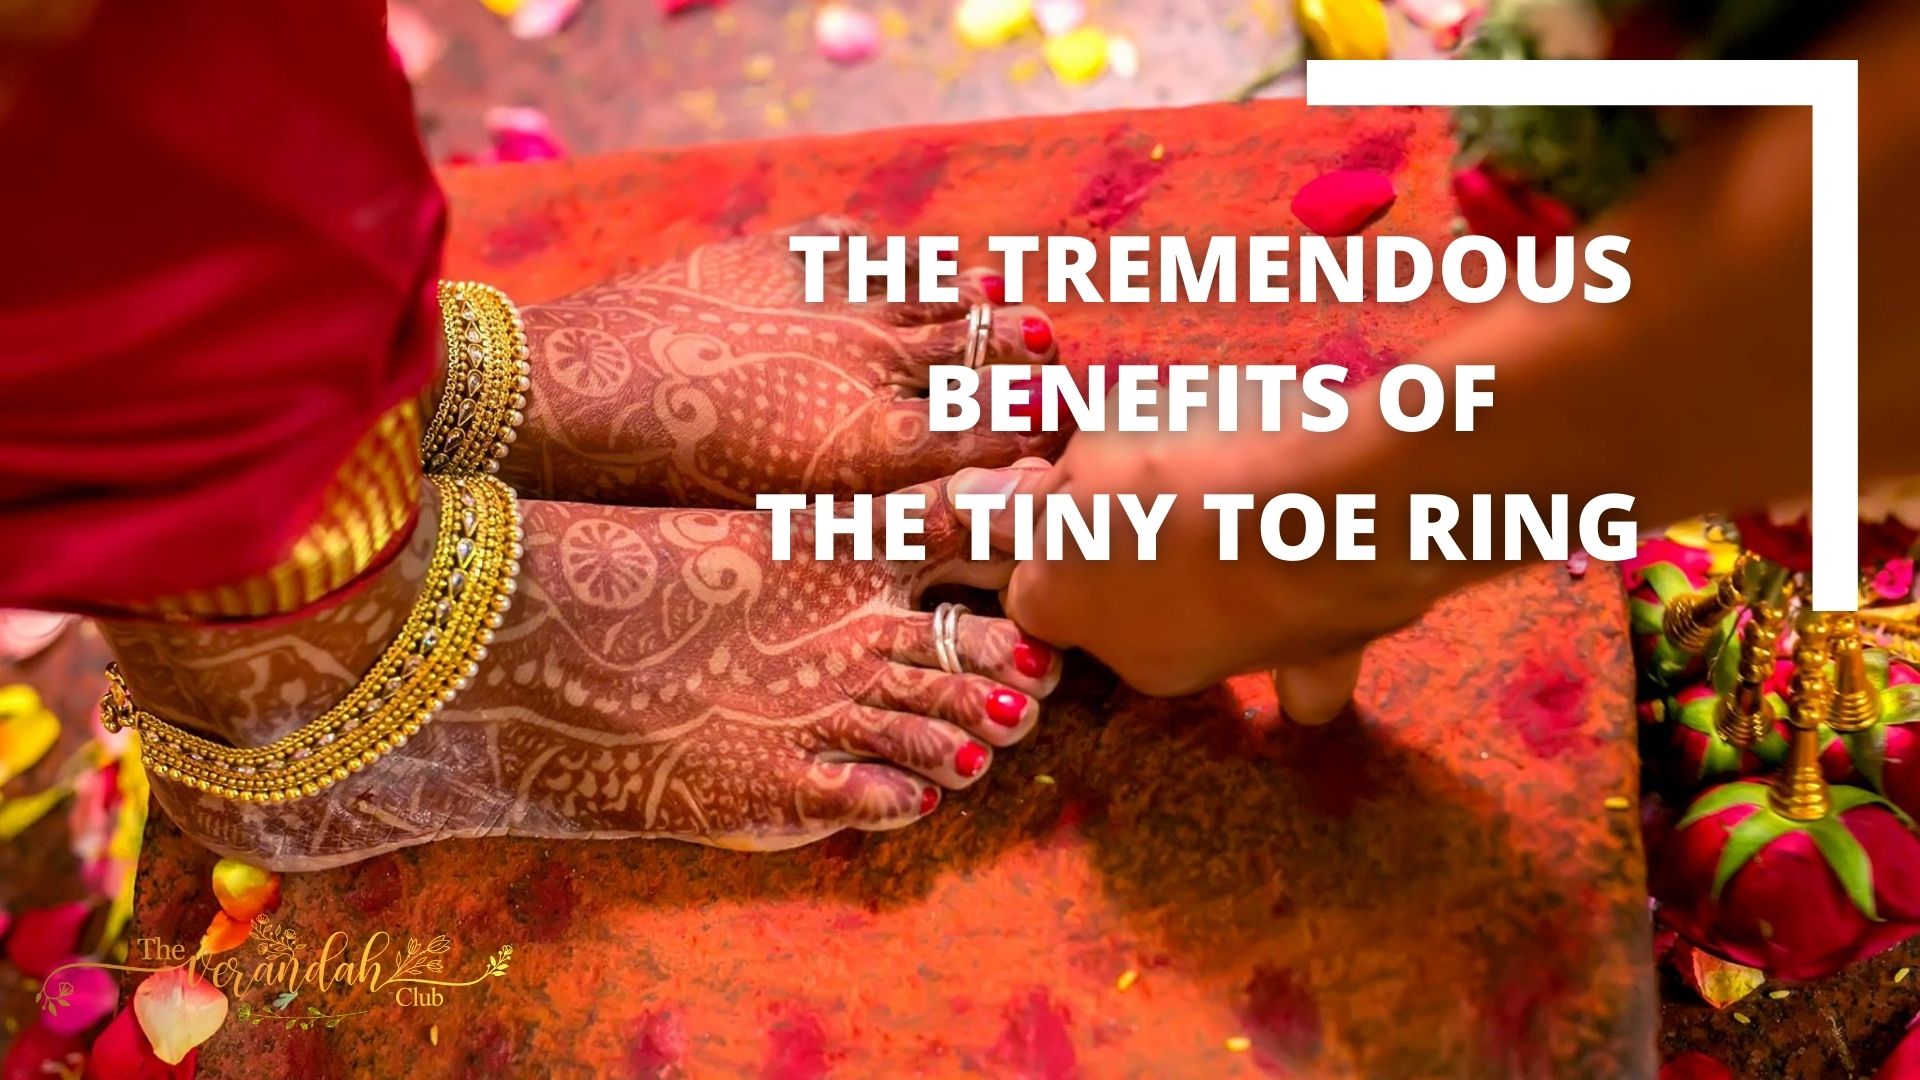 The Tremendous Benefits of the Tiny Toe Ring